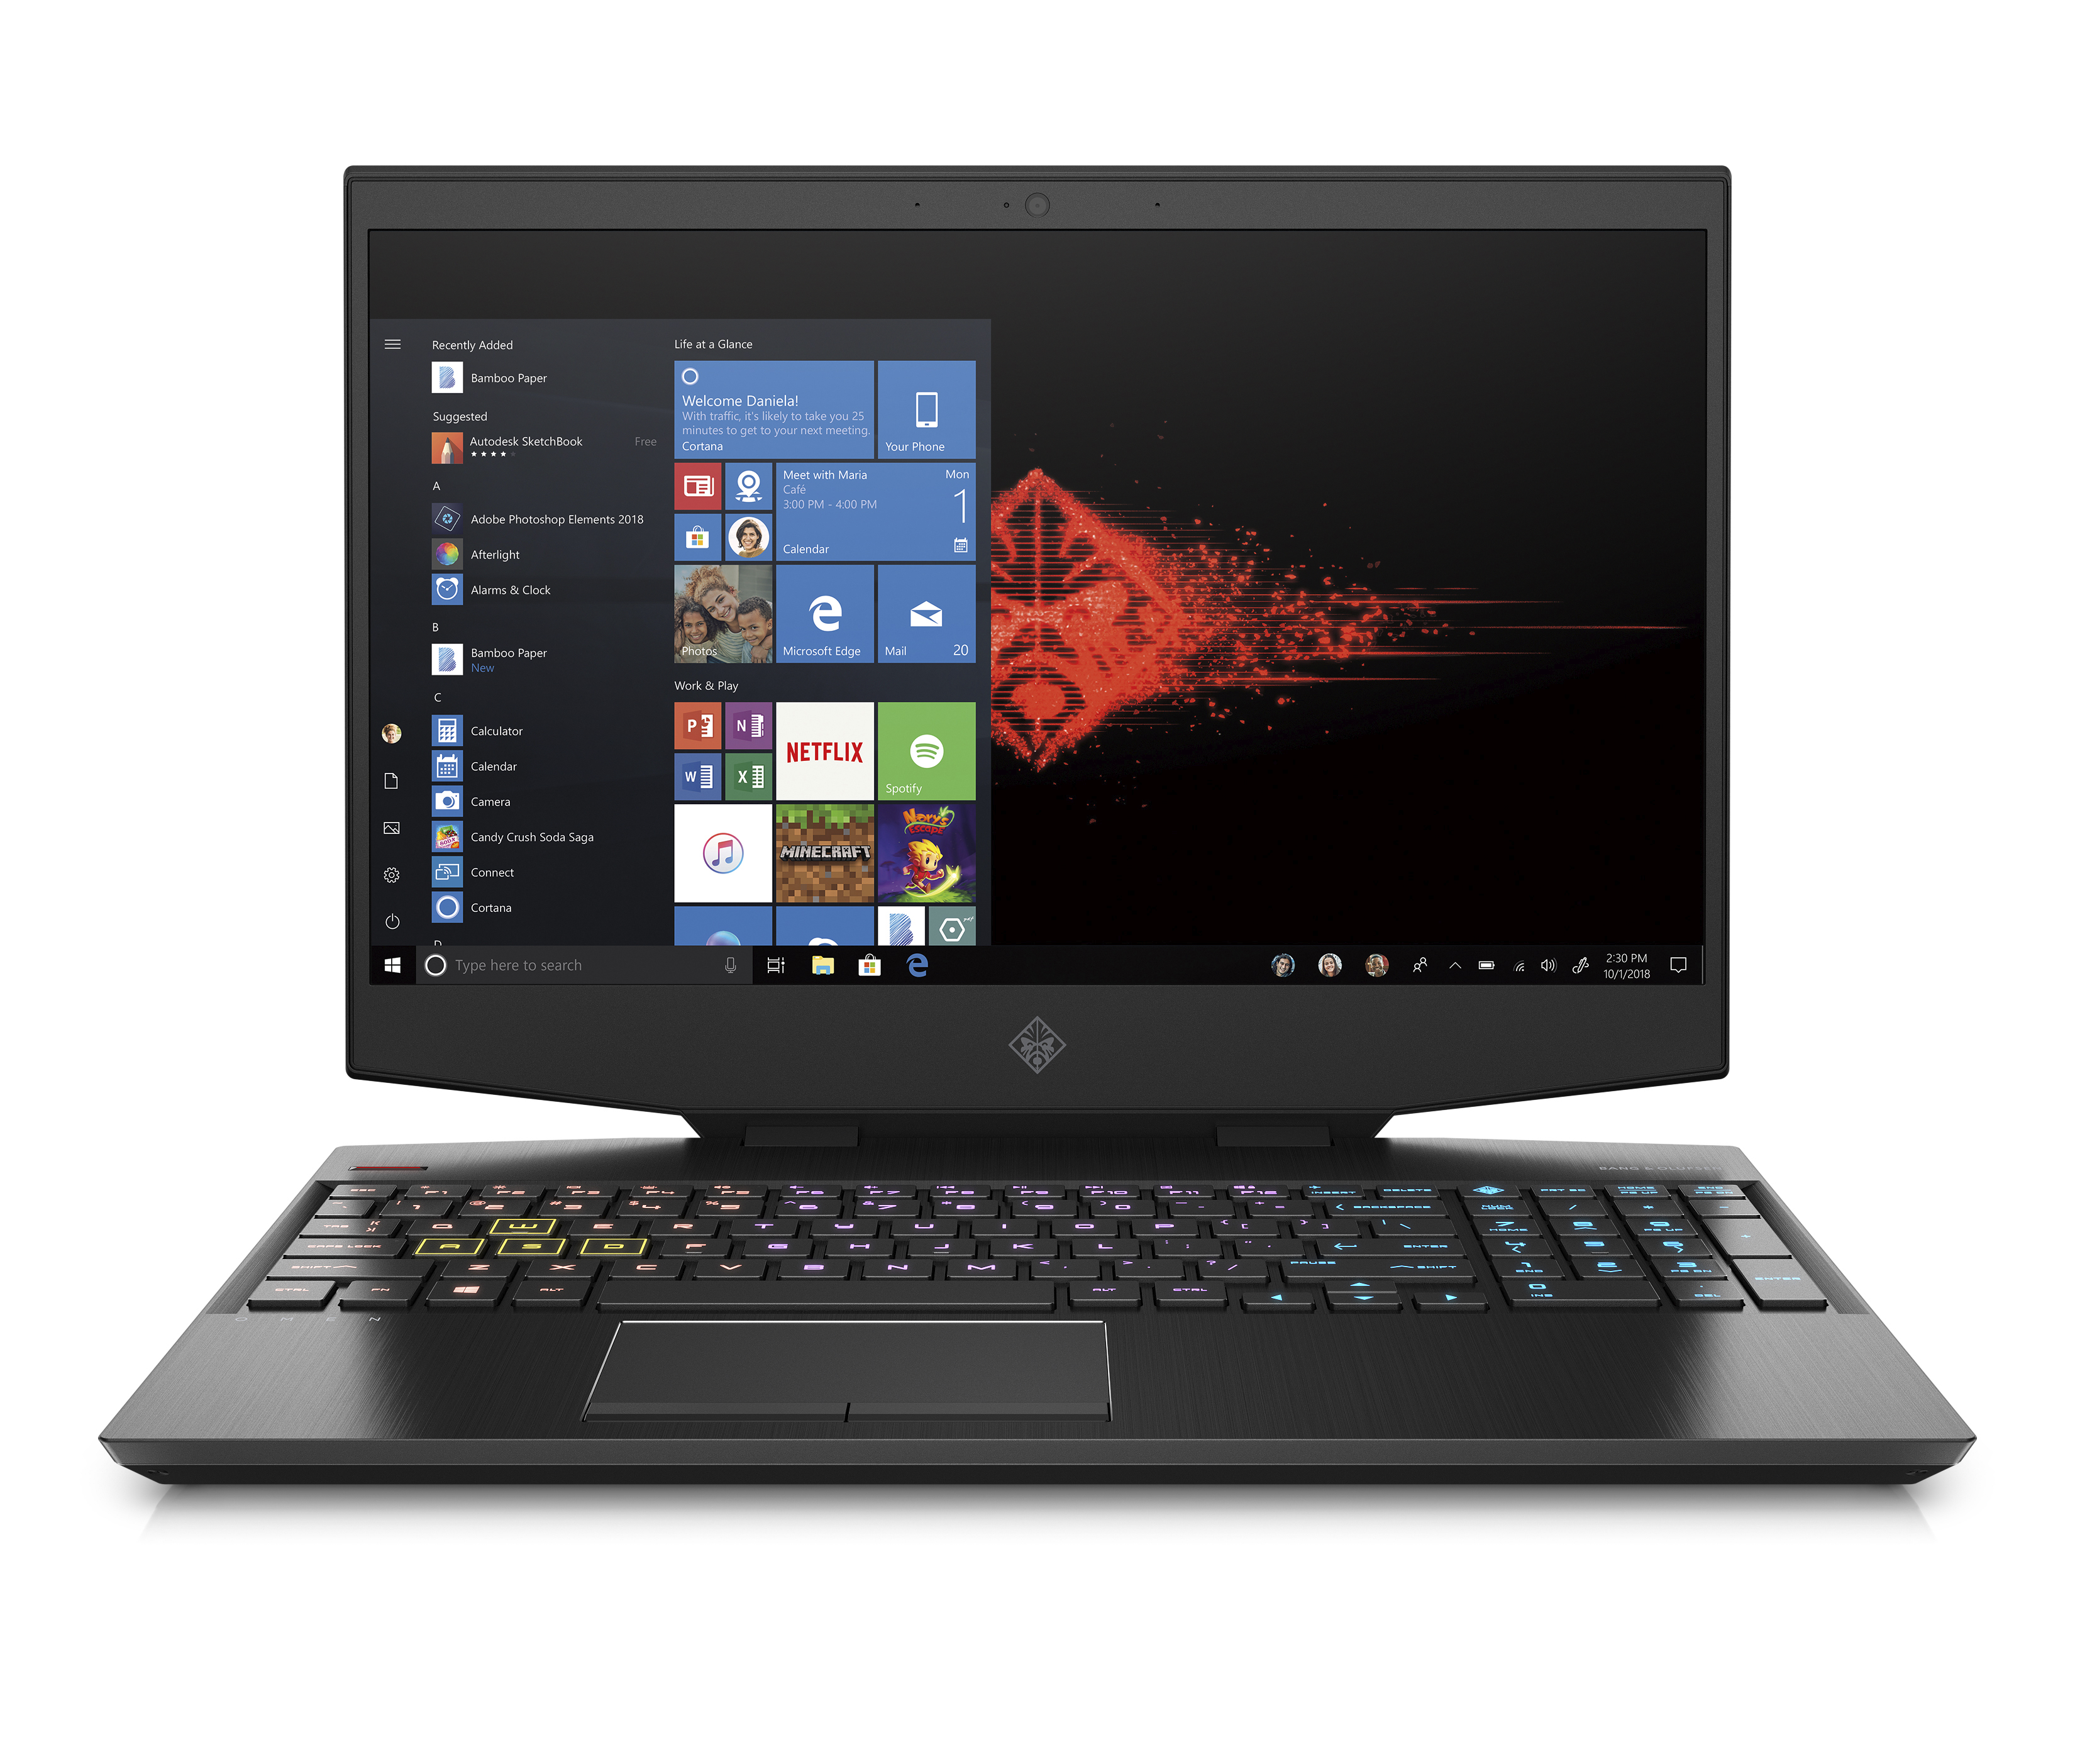 HP OMEN Laptop 15-dh1020nr 15.6" With Intel Core i7-10750H 8GB DDR4 512GB SSD Windows 10 Home Laptop - image 1 of 4